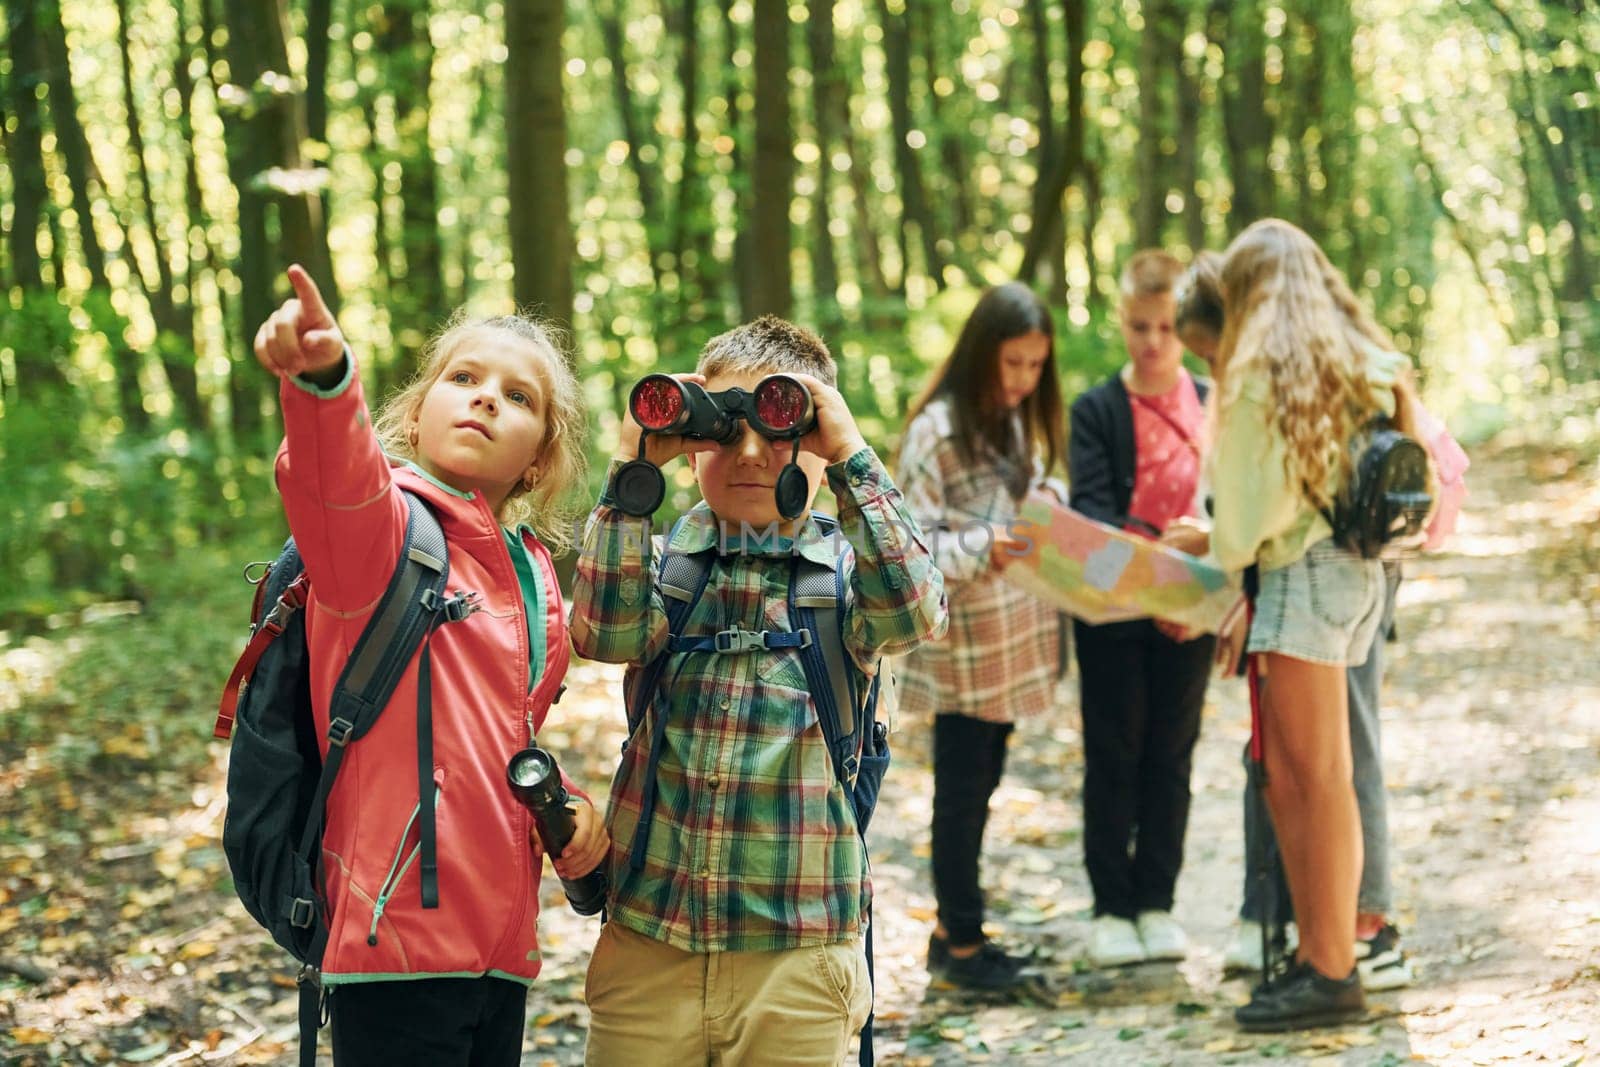 New places. Kids in green forest at summer daytime together by Standret